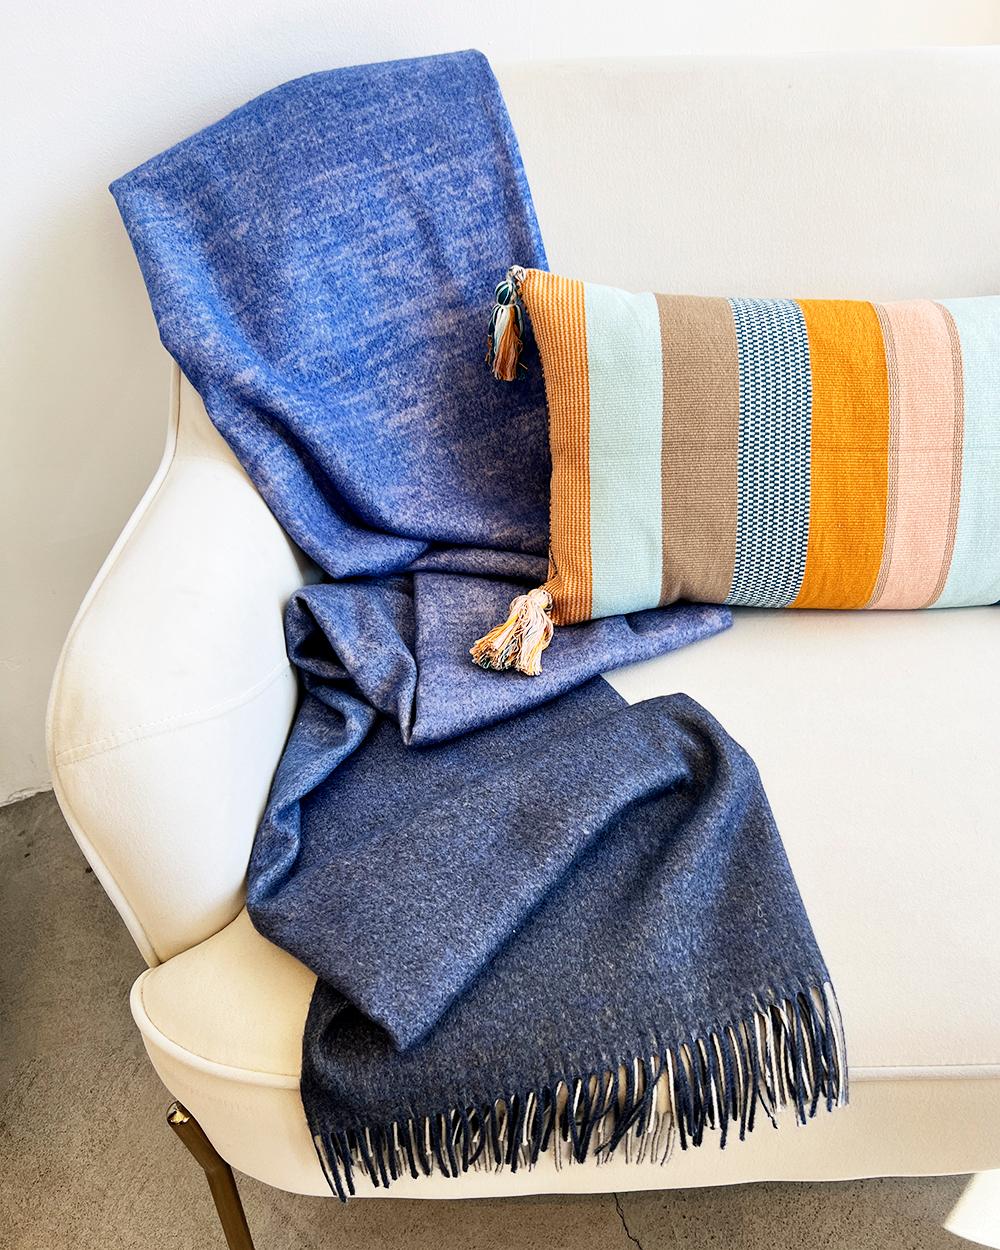 Cozy throw blankets for your home.

Measurements: 51